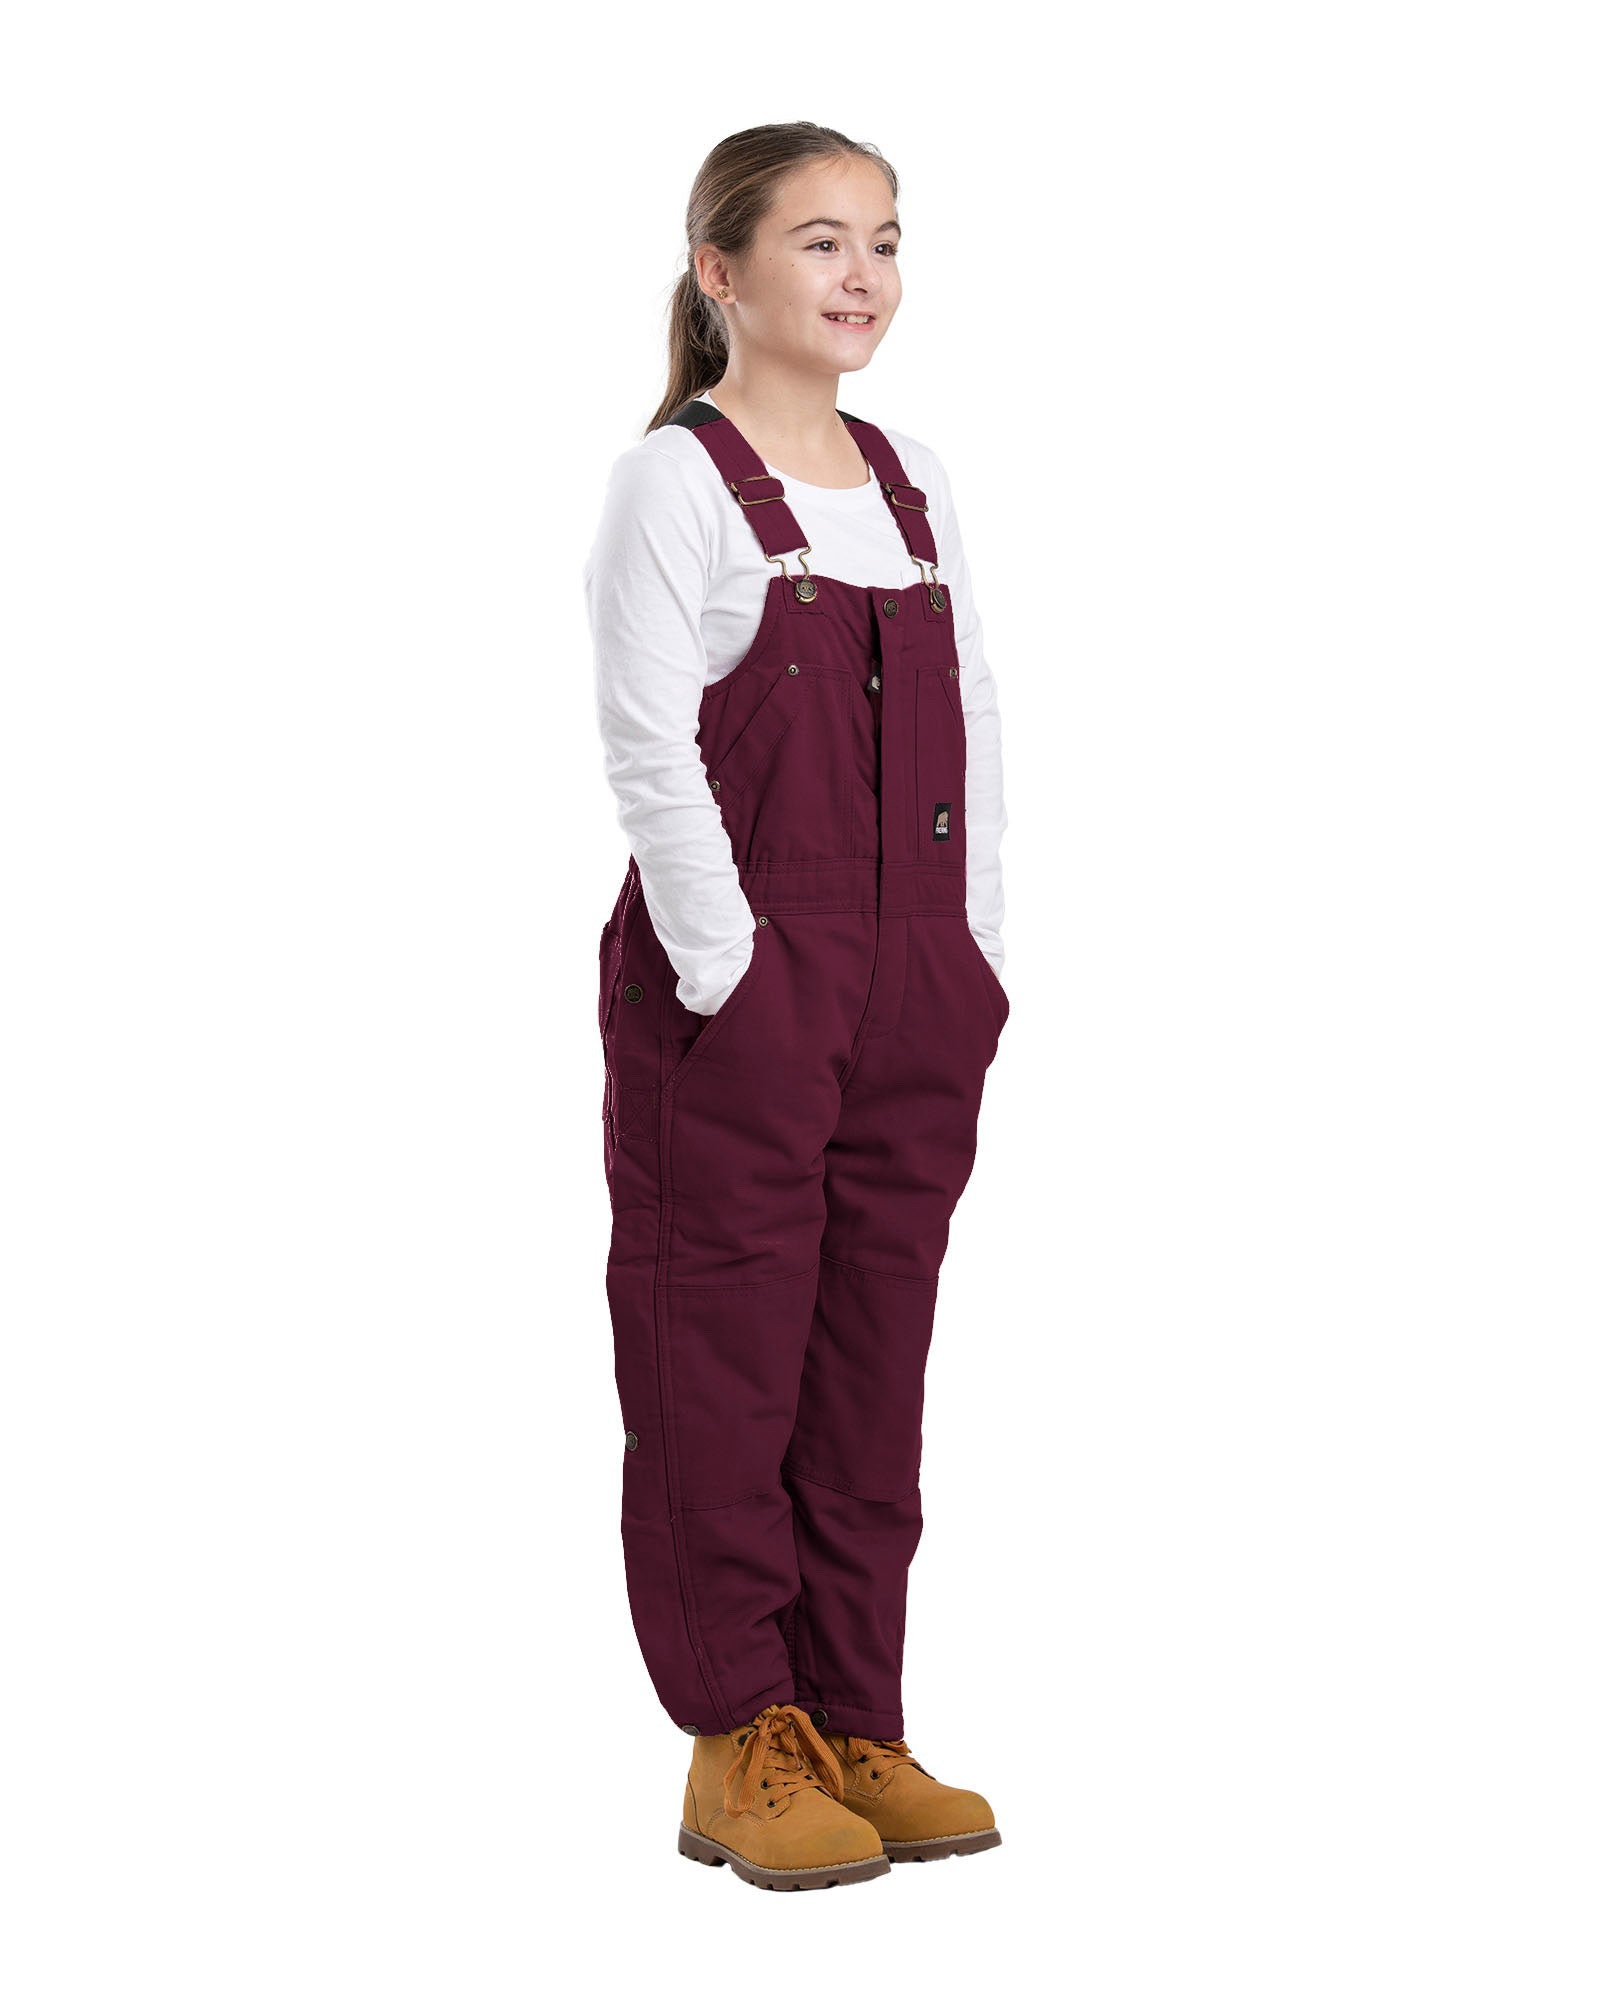 YWDJ Pants for Women Women Insulated Bib Overalls Solid Color